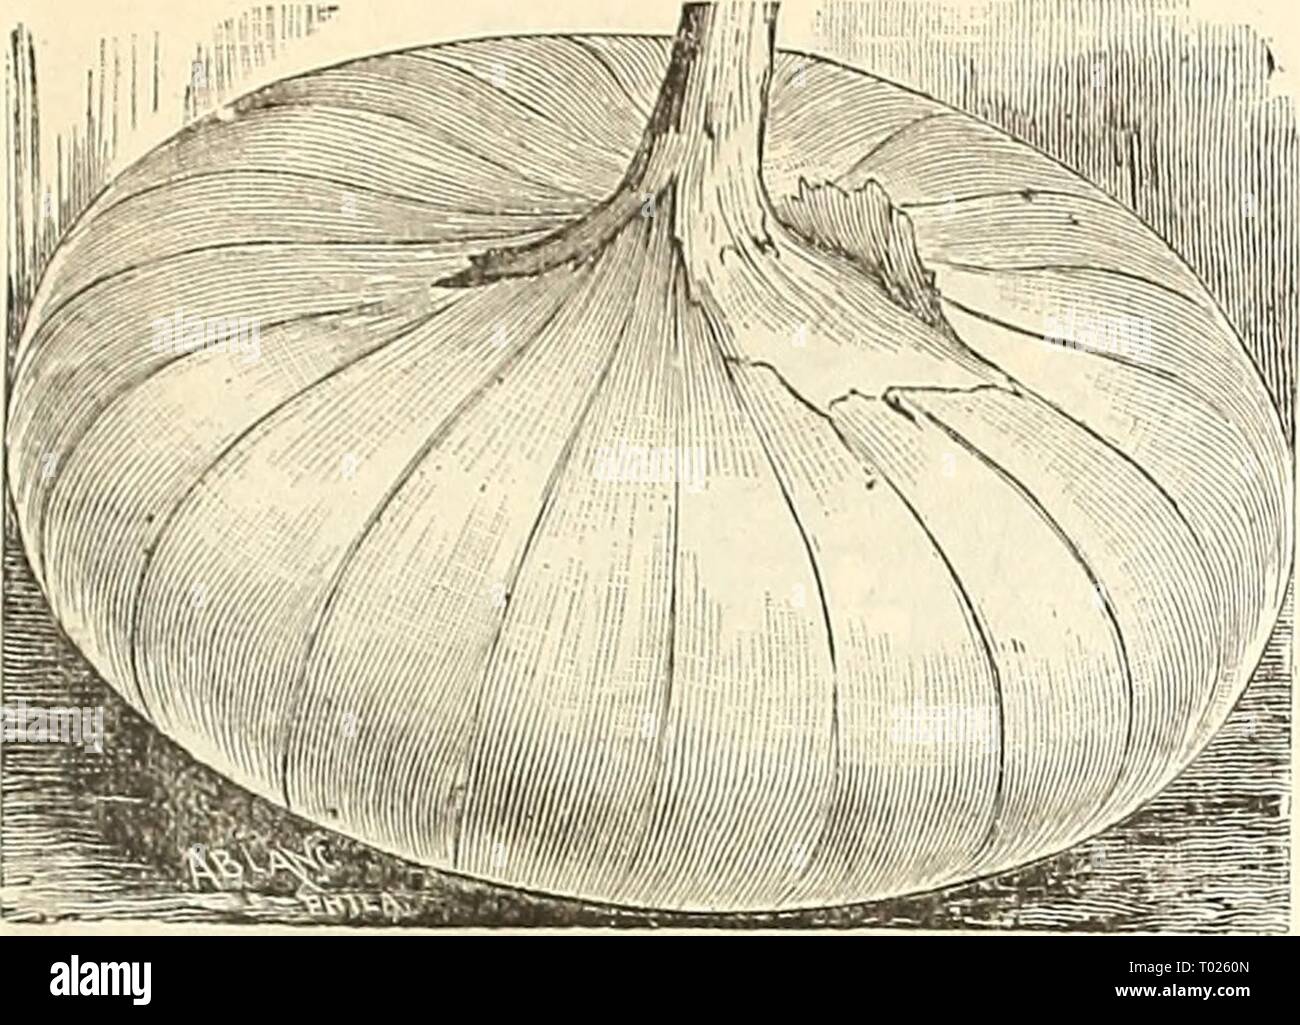 Dreer's garden calendar : 1891 . dreersgardencale1891henr Year: 1891  FOR THE VEGETABLE GARDEN. 29    MAMMOTH SILVER KING. Tliis is the largest of the white Italian Onions, and attains an eiiornious size in one season from seed. Tliis sort is deserving of extensive cultivation, and will be found especially serviceable in the family garden, as it is of mild flavor, attractive appearance and form, and a good keeper. I'kt. 10 cts., oz. 25 cts., i lb. 75 cts., lb. $2.60. Stock Photo